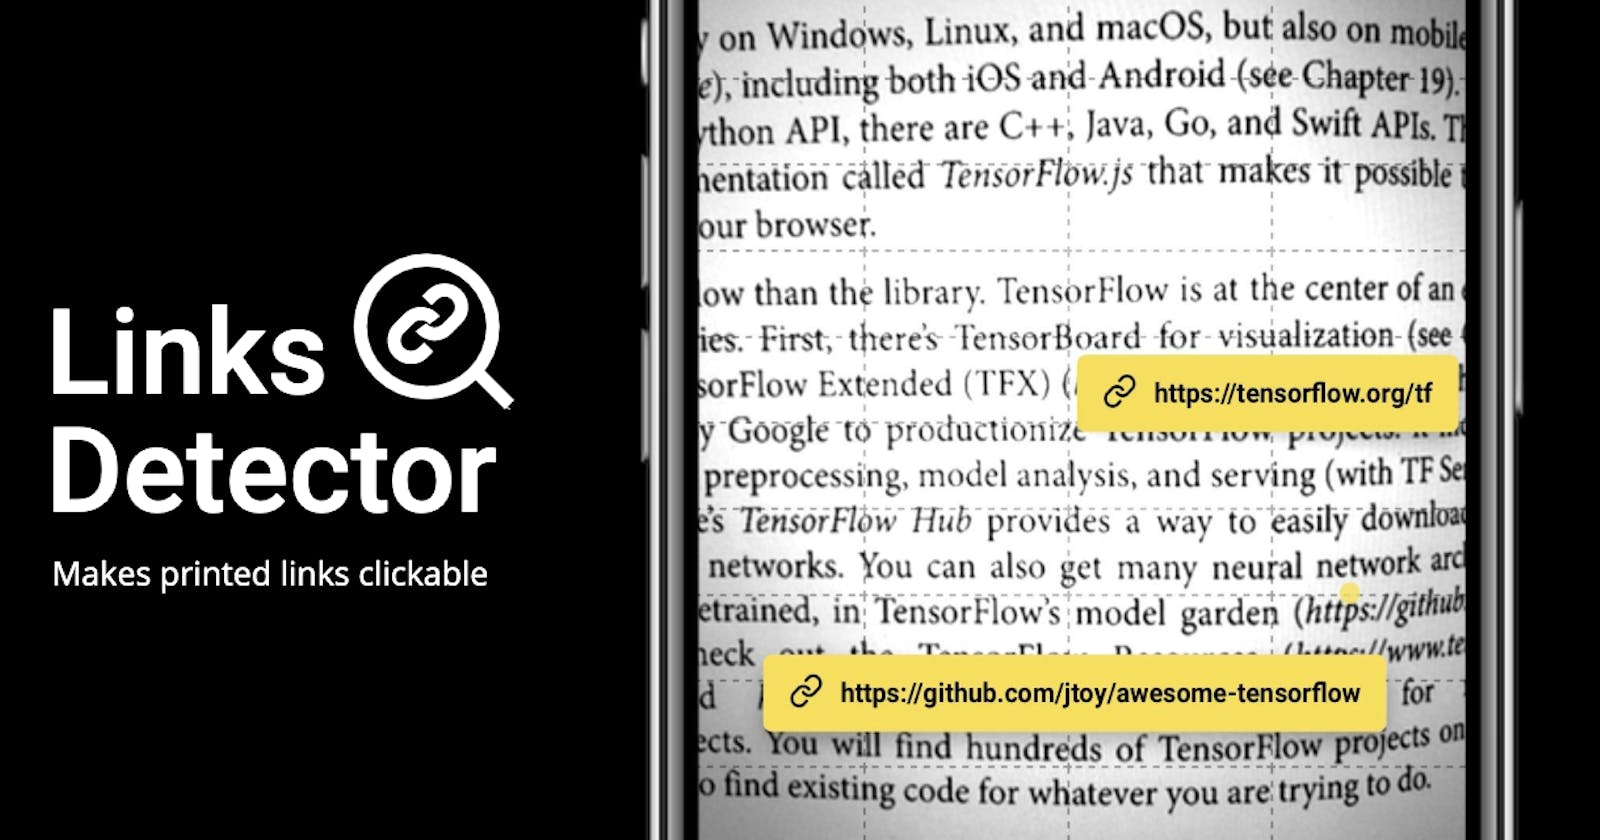 # 📖 👆🏻 Making the Printed Links Clickable Using TensorFlow 2 Object Detection API